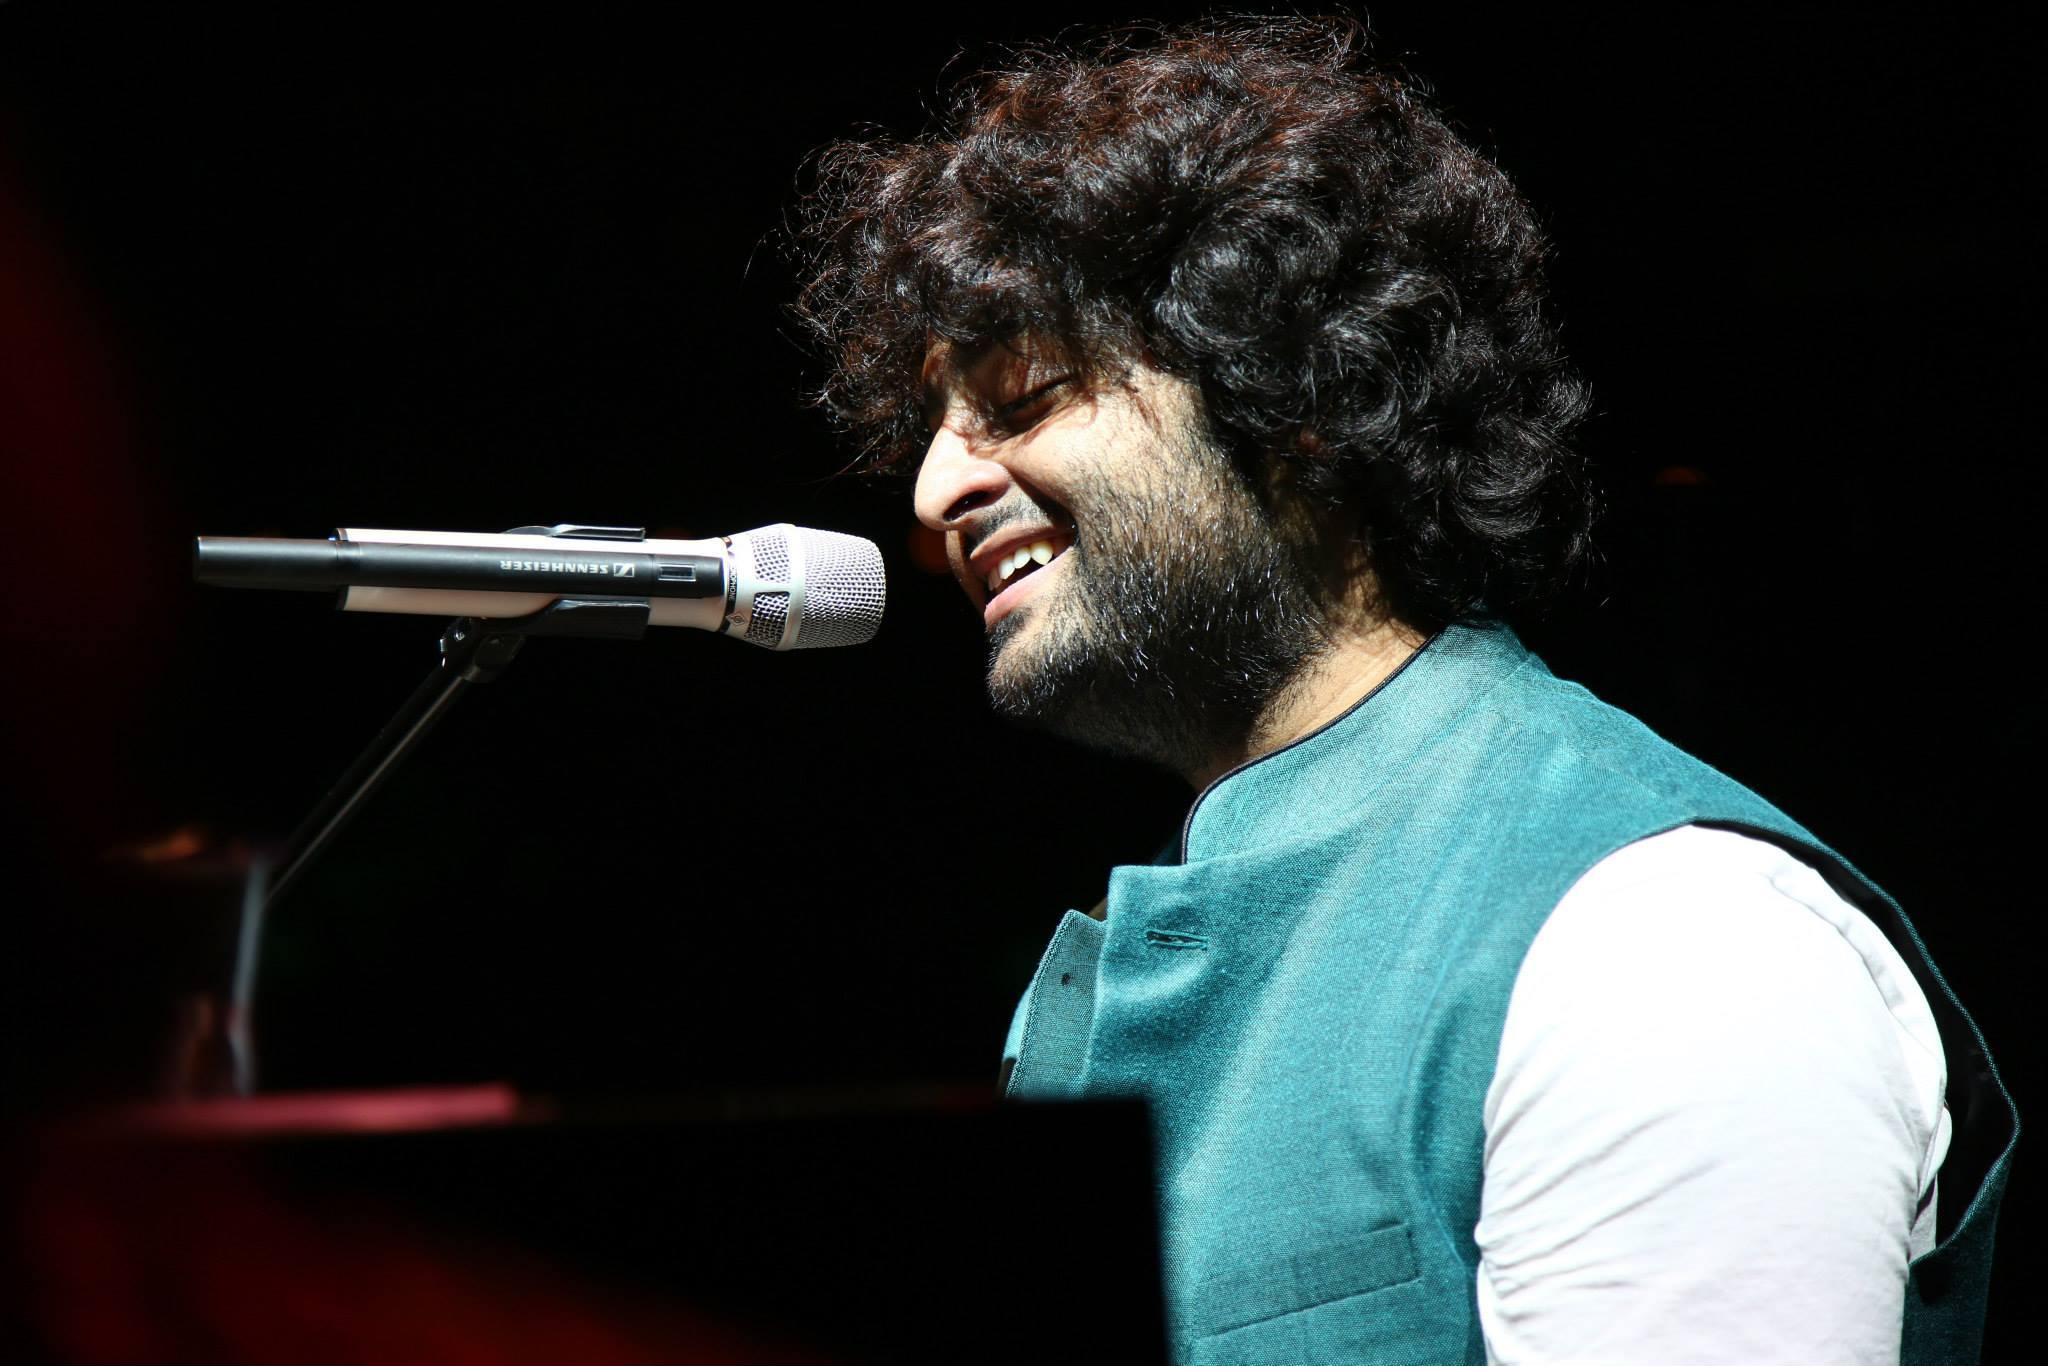 Indian playback singer and a music programmer.
http://t.co/9sLvMEWfIR